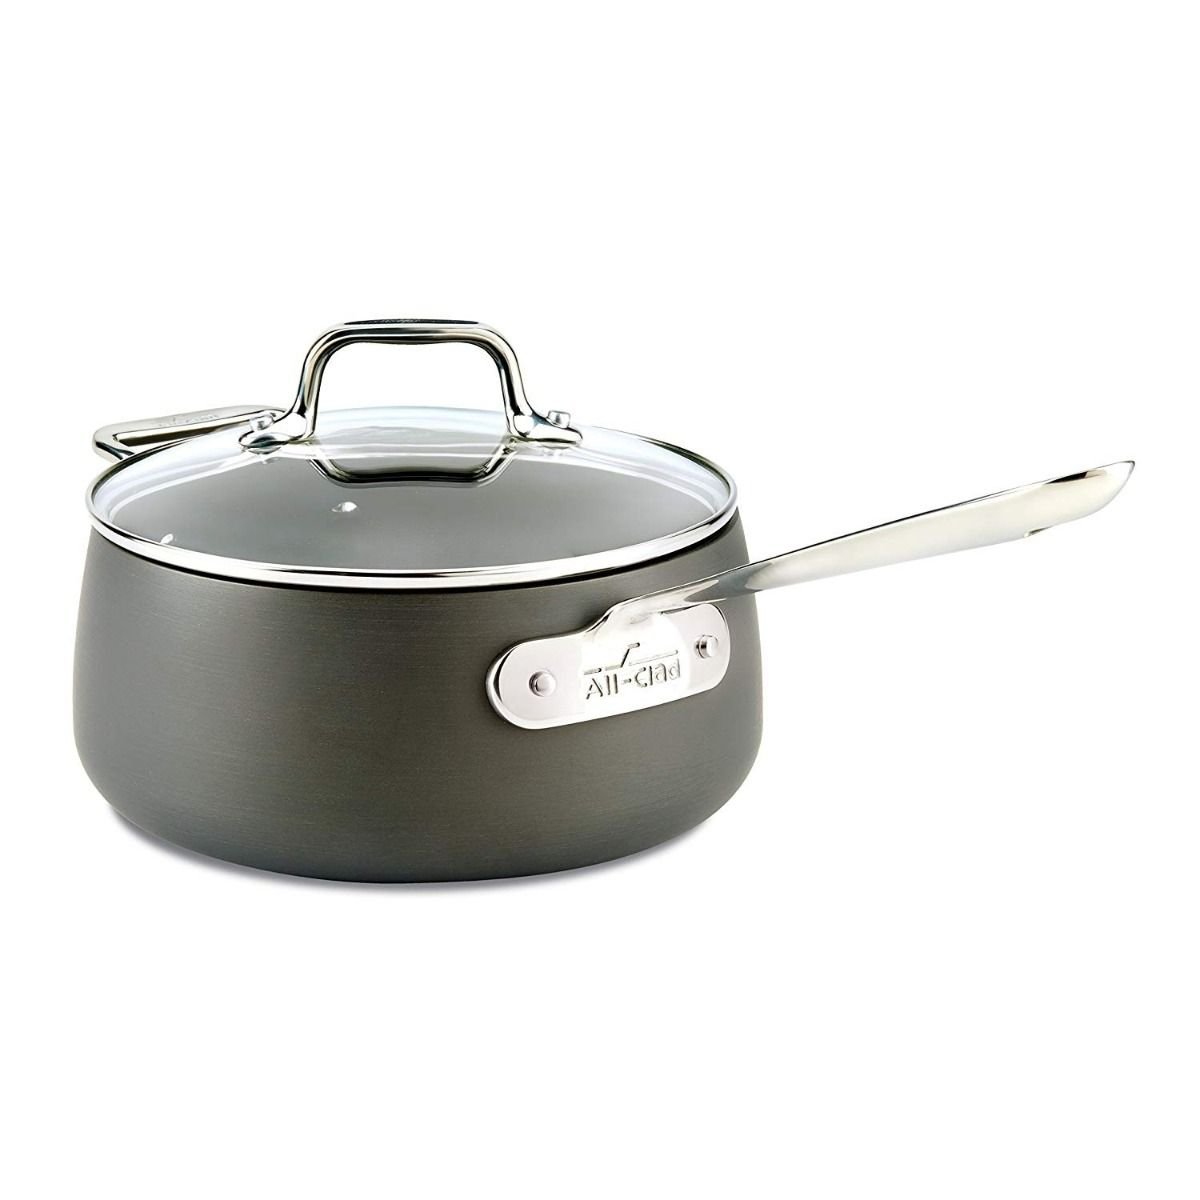 All-Clad HA1 Curated Hard-Anodized Non-Stick 4-Qt. Everyday Pan with Lid +  Reviews